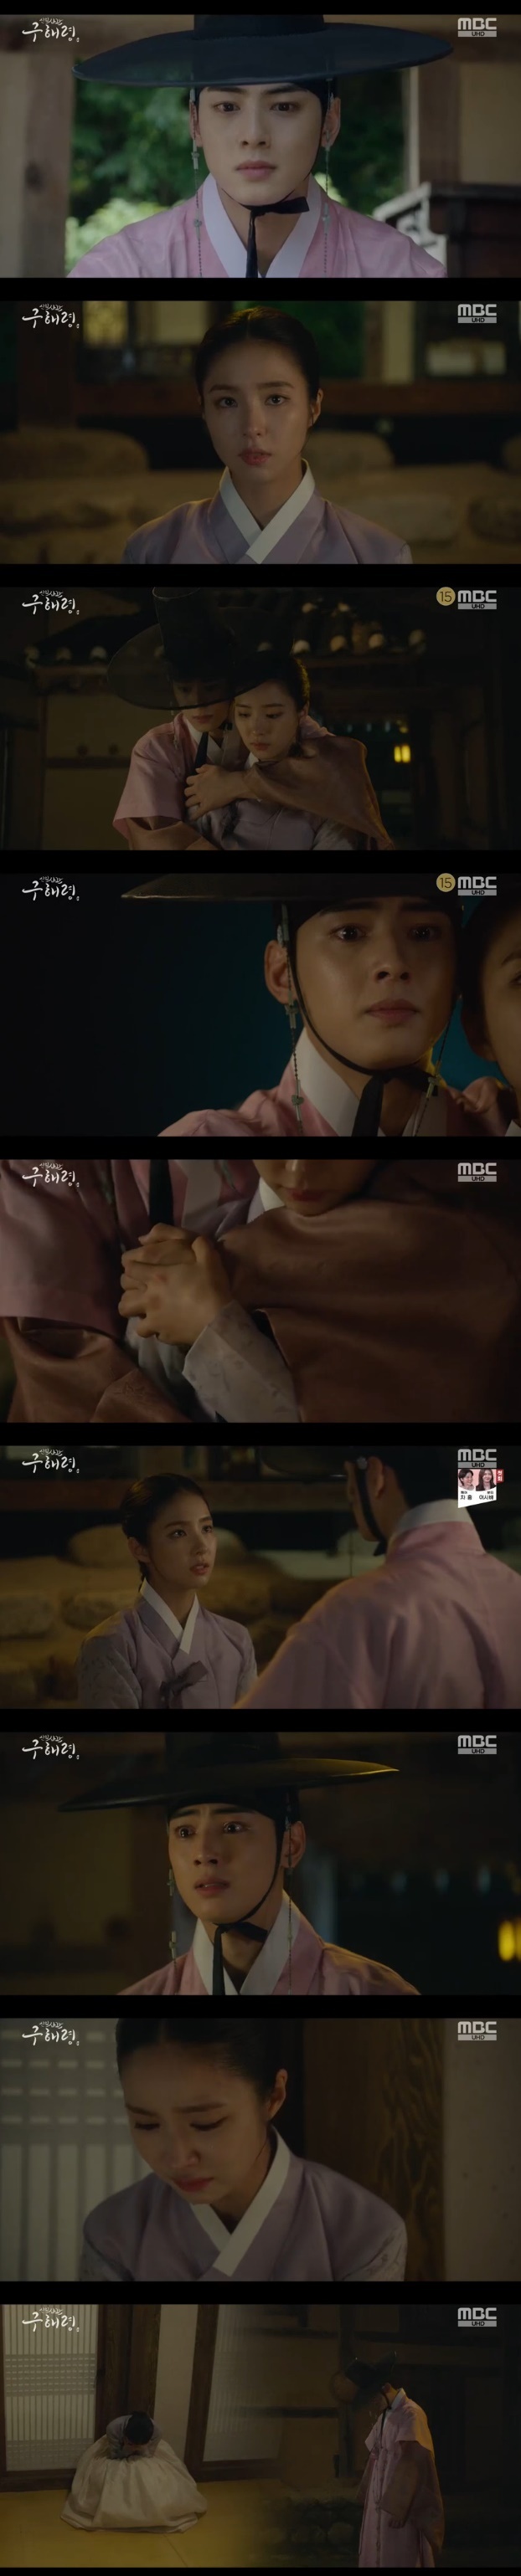 Seoul =) = Will new officer Rookie Historian Goo Hae-ryung Shin Se-kyung and Cha Eun-woo completely part ways?In the MBC drama The New Entrepreneur Rookie Historian Goe-ryung, which was broadcast on the afternoon of the 5th, Ada Lovelace Rookie Historian Goo Hae-ryungShin Se-kyung) closed his mind to the news of the marriage of Sejo of Joseon Yirim (Cha Eun-woo).Rookie Historian Goo Hae-ryung and Irim had an argument for this.To the Sejo of Joseon, the Rookie Historian Goo Hae-ryung replied, Its a fish name, you have to follow.Not showing off any upset feelings.Lee Lim continued his routine without Rookie Historian Goo Hae-ryung.Rookie Historian Goo Hae-ryung was given a preparatory entrance exam and saw a lot of GLOW coming to marry Lee Lim with his eyes.Irim, who eventually prepared for the wedding, although he had a beloved GLOW. He read the book without any thought and stayed expressionless.Rookie Historian recalled Goo Hae-ryung after going to see the house.Irim visited the house of Rookie Historian Goo Hae-ryung; however, he only heard the cold words go back.Irim, who gave a backhug to Rookie Historian Goo Hae-ryung, who turned around, said, Ill throw it all away.If you dont want to live as the wife of Sejo of Joseon, I will.  I can throw away everything unless Im Sejo of Joseon.I can throw everything away, he confessed.You can go to a place where no one knows, were just happy, you just want to do what you want to do, and Im just next to you, and lets just stay that way, he added.But Rookie Historian Goo Hae-ryung, out of his arms, said firmly that reality is not a novel.It may be a beautiful ending in the novel that leaves like that, but the reality is different.I am living with all the days of my life that do not end even if I cover the book, and I am chasing it with my burden in my heart. Irim asserted, You can live like that; you dont regret it. Still, Rookie Historian Goo Hae-ryung said, No, well be tired over time.I will be tired and tired and someday I hate each other and regret the choice of this day. The two of them were blinded by the difficult situation.Rookie Historian Goo Hae-ryung told Irim, I promise, I swear I wont do that, adding, I dont believe me, not Mama.If I suddenly have a little regret, and if it grows, I blame Mama and hate her, can I endure it?So go back, he said. Please meet a broad-minded person and look at the same place and live in love. Mama can do that. You know youre all I have, Irim said to departing Rookie Historian Goo Hae-ryung.Rookie Historian Goo Hae-ryung secretly wiped away tears and lied, Im sorry, Im not.Rookie Historian Goo Hae-ryung sank as soon as he entered the room.Rookie Historian Goo Hae-ryung, who was standing there, was also tearful.Meanwhile, New Entrepreneur Rookie Historian Goo Hae-ryung is a drama depicting the first problematic Ada Lovelace () Rookie Historian Goo Hae-ryung of Joseon and the Phil full romance annals of Prince Irim, the anti-war mother solo, broadcast every Wednesday and Thursday at 8:55 pm.